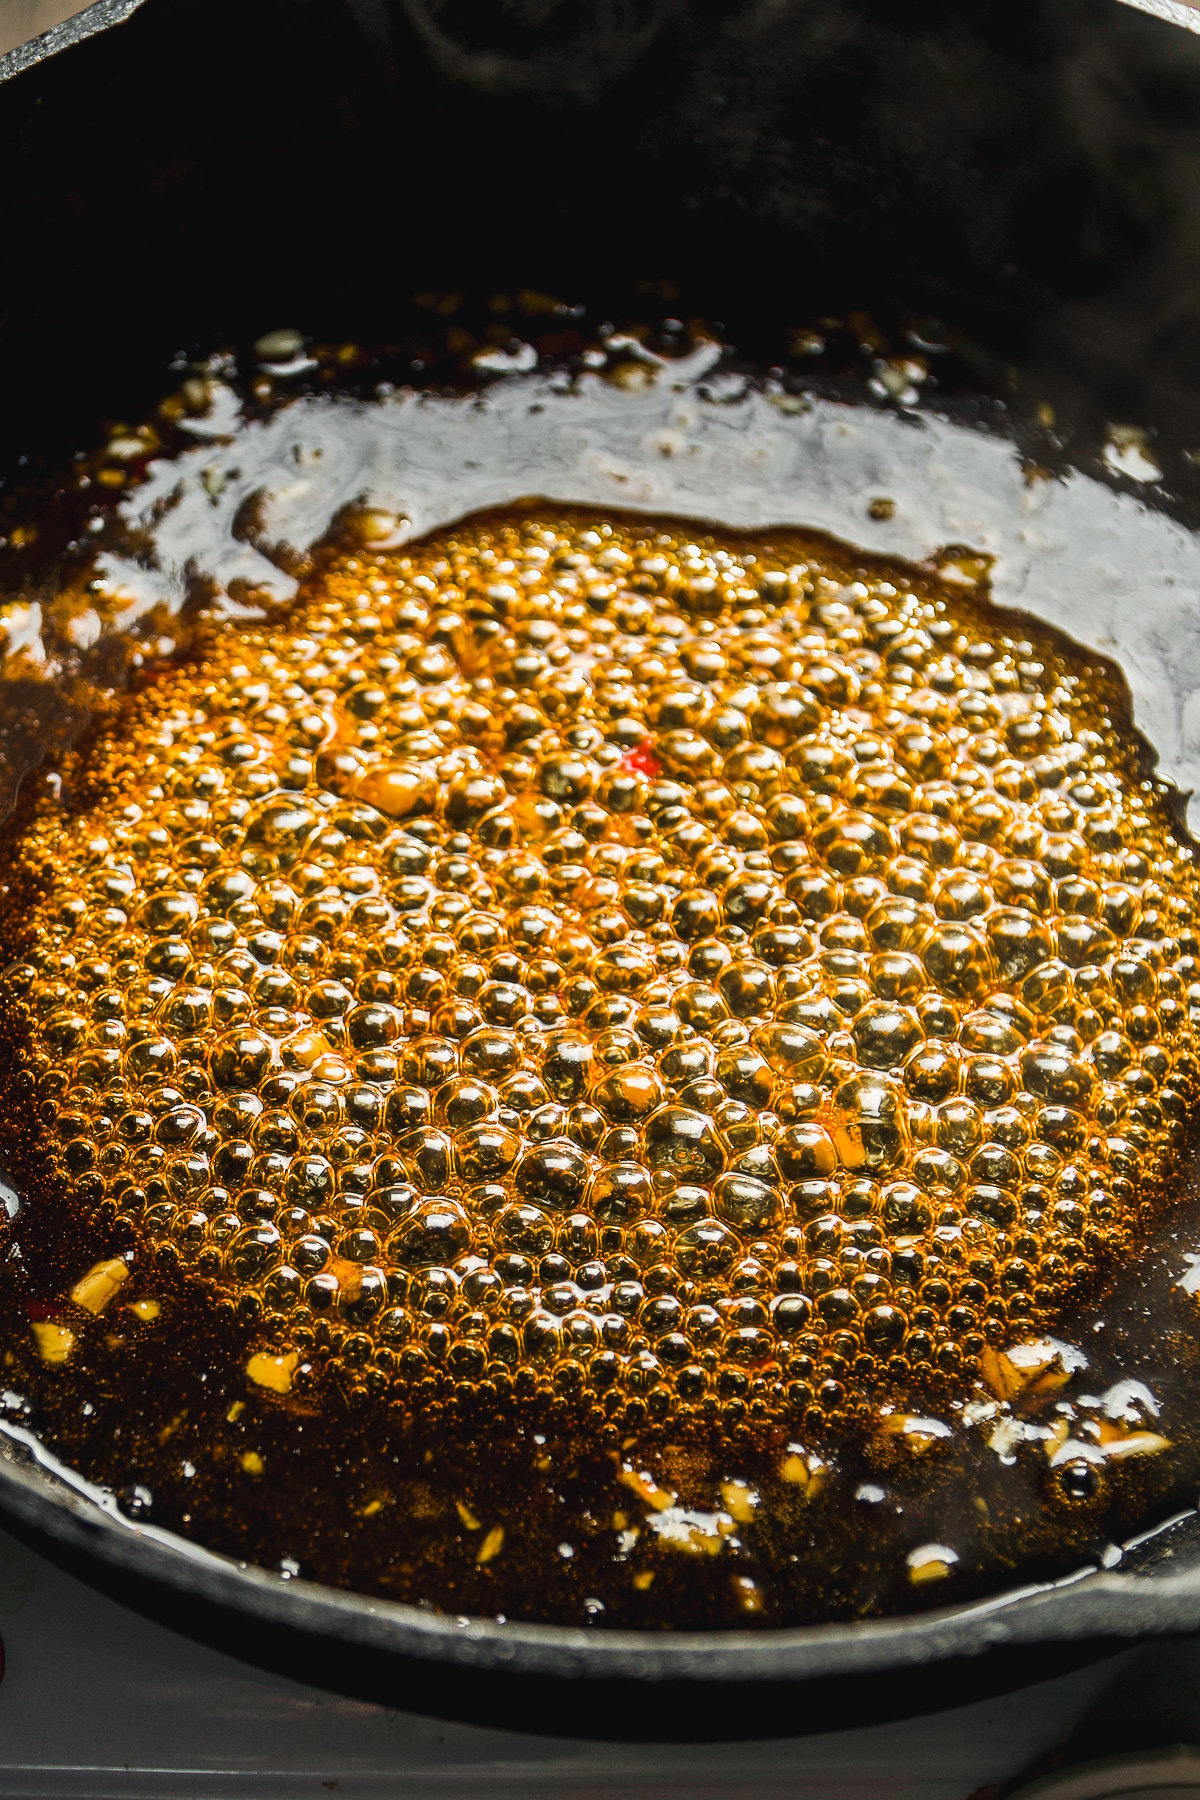 Honey chili sauce sizzling in a black skillet.